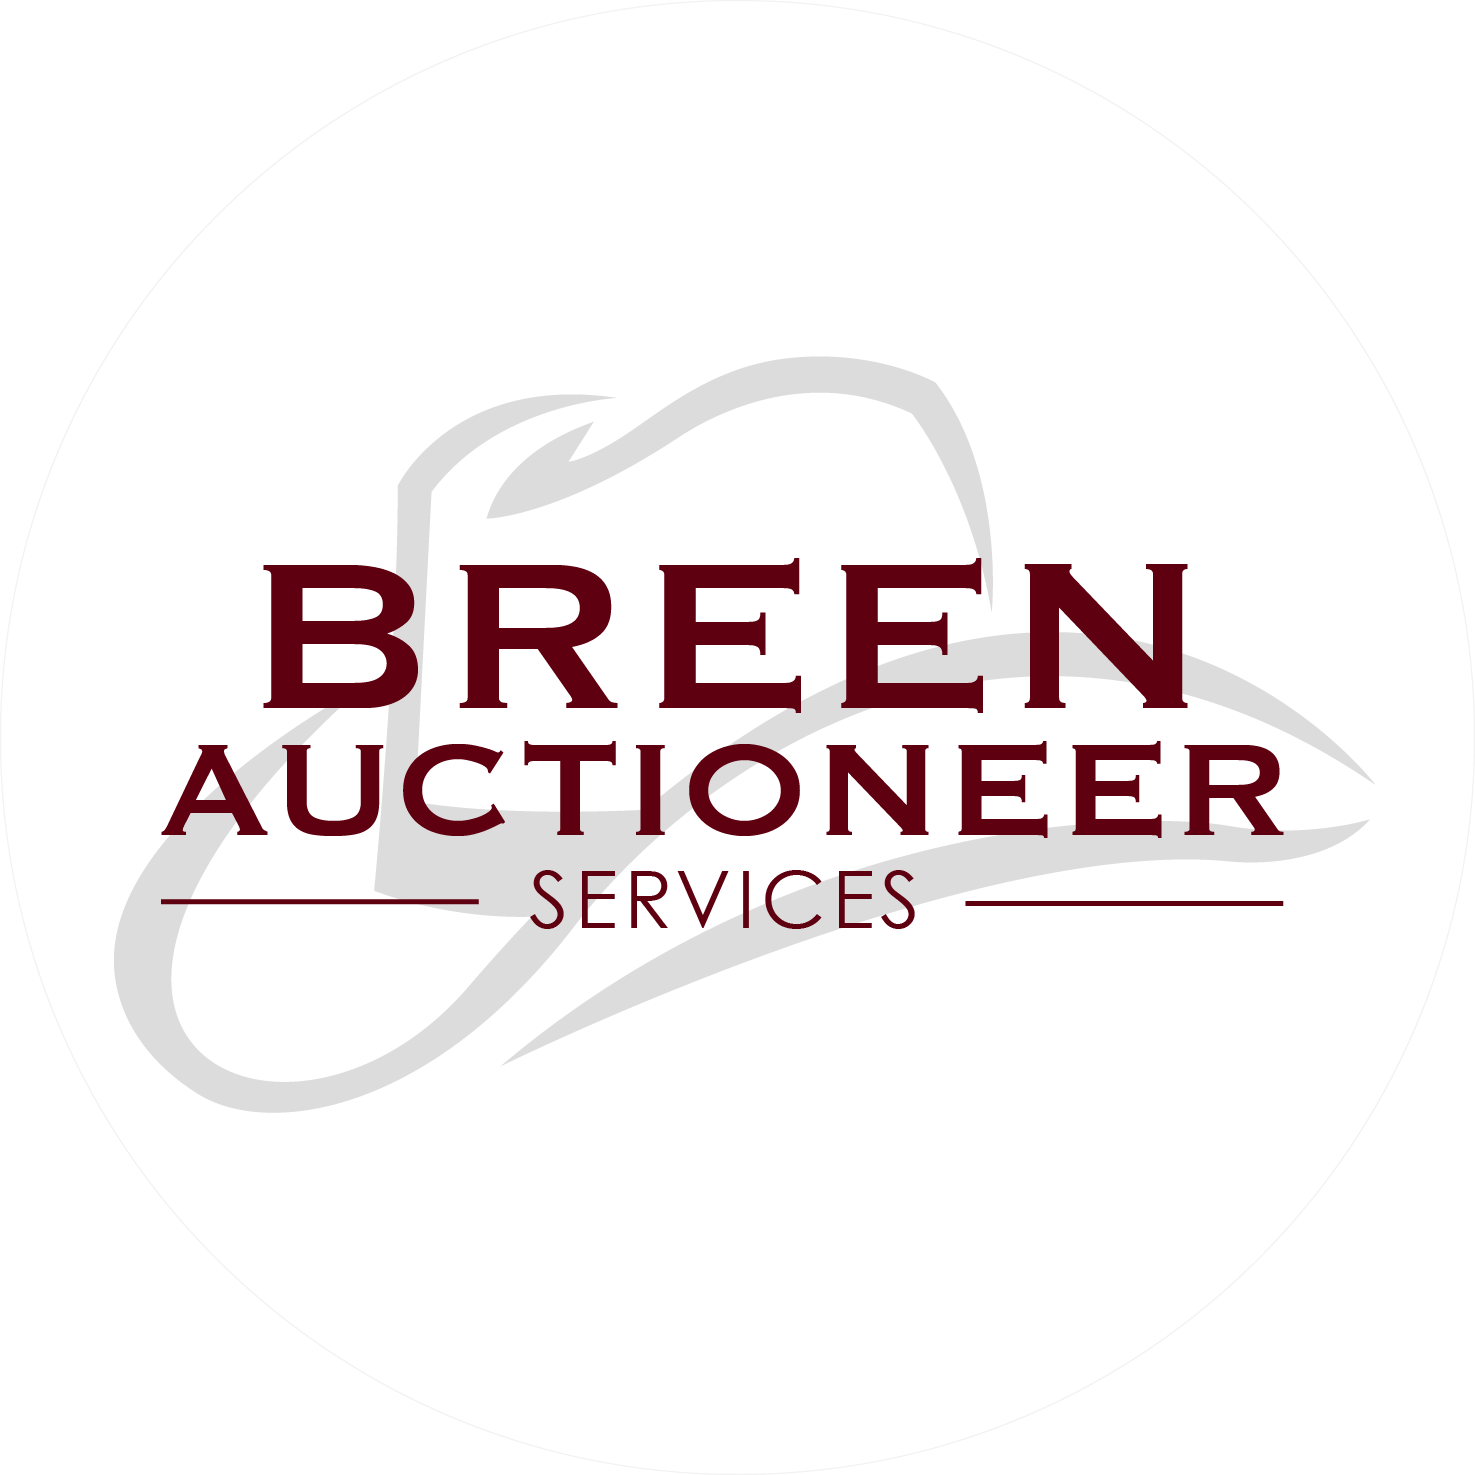 Breen Auctioneer Services